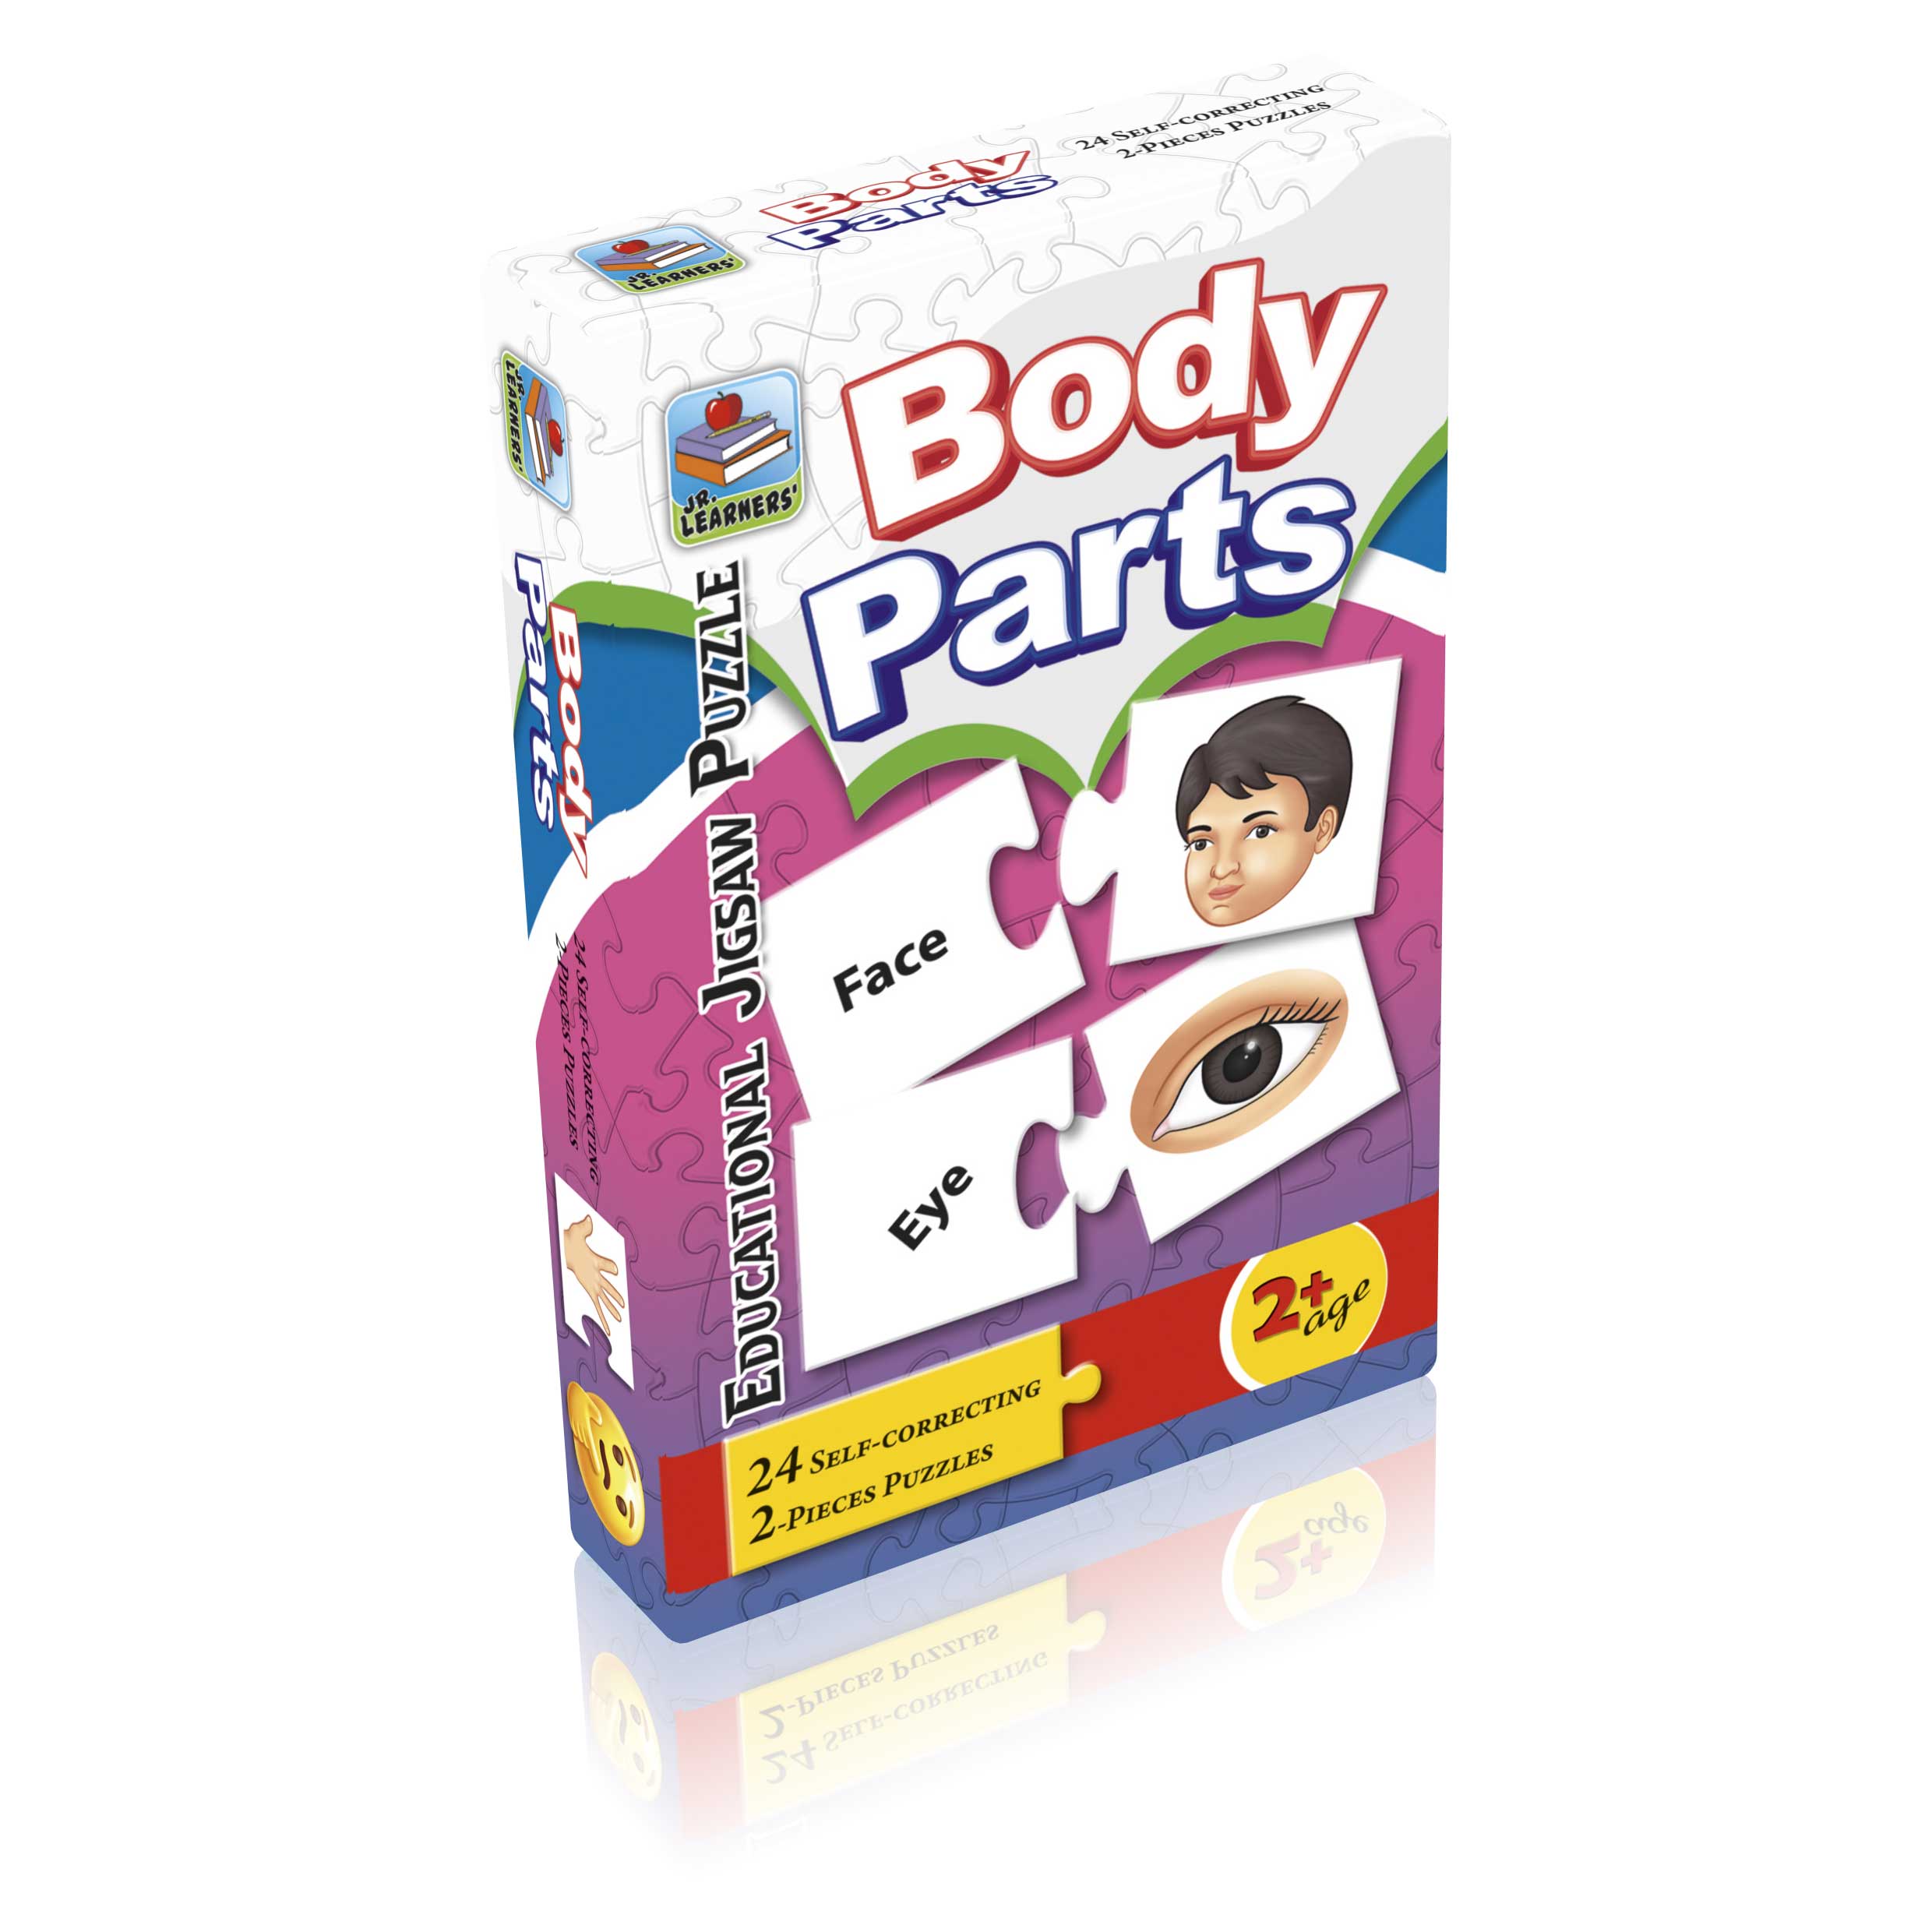 Parts of Body Educational Jigsaw Puzzles